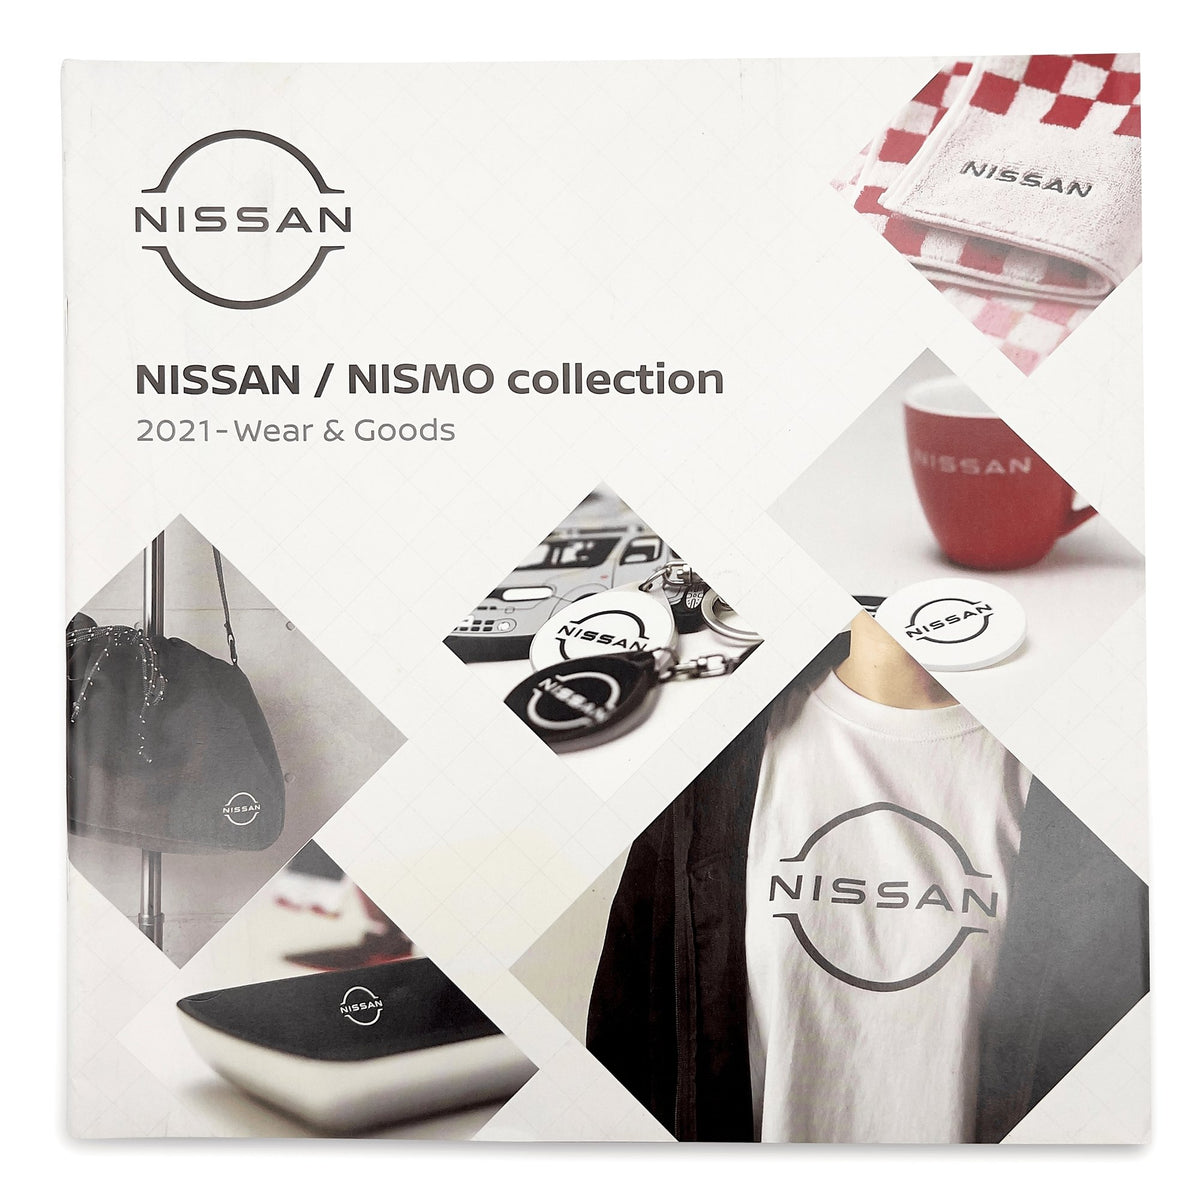 New Nissan JDM Nismo Japan Collection Wears And Goods Catalog - Sugoi JDM